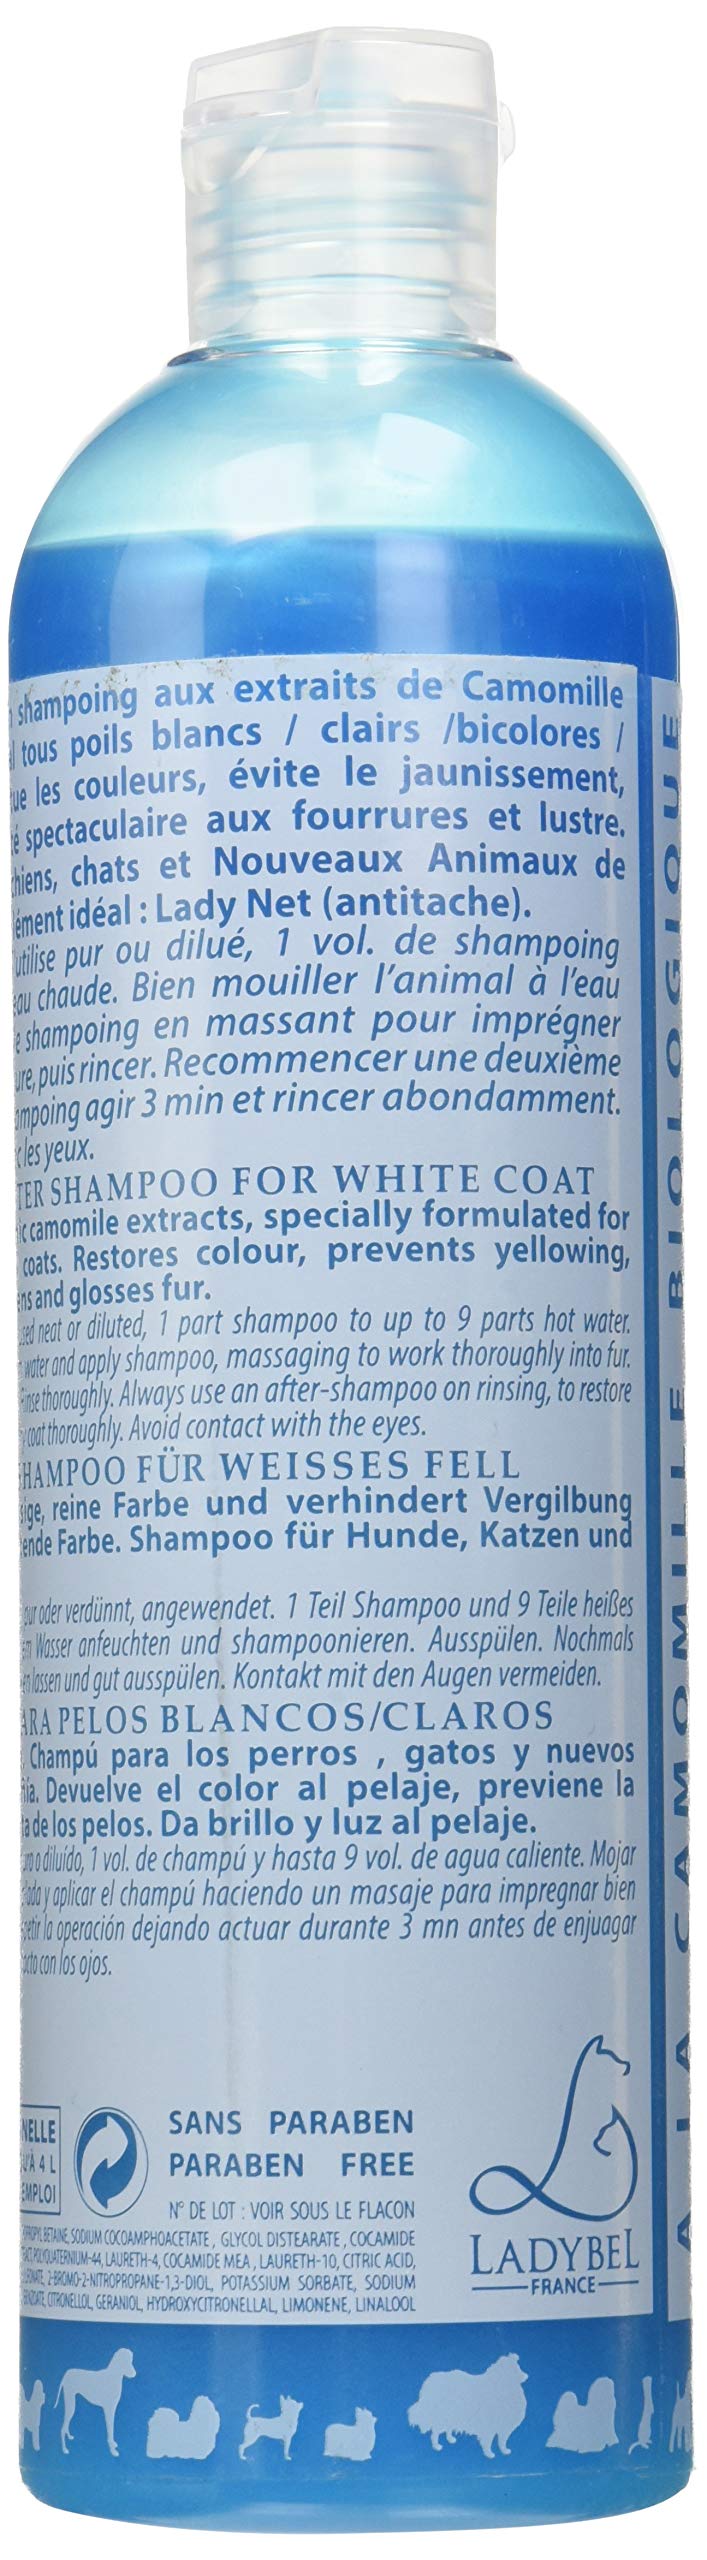 Ladybel Lady White Shampoo for Dogs 400 ml - Pack of 2 - PawsPlanet Australia